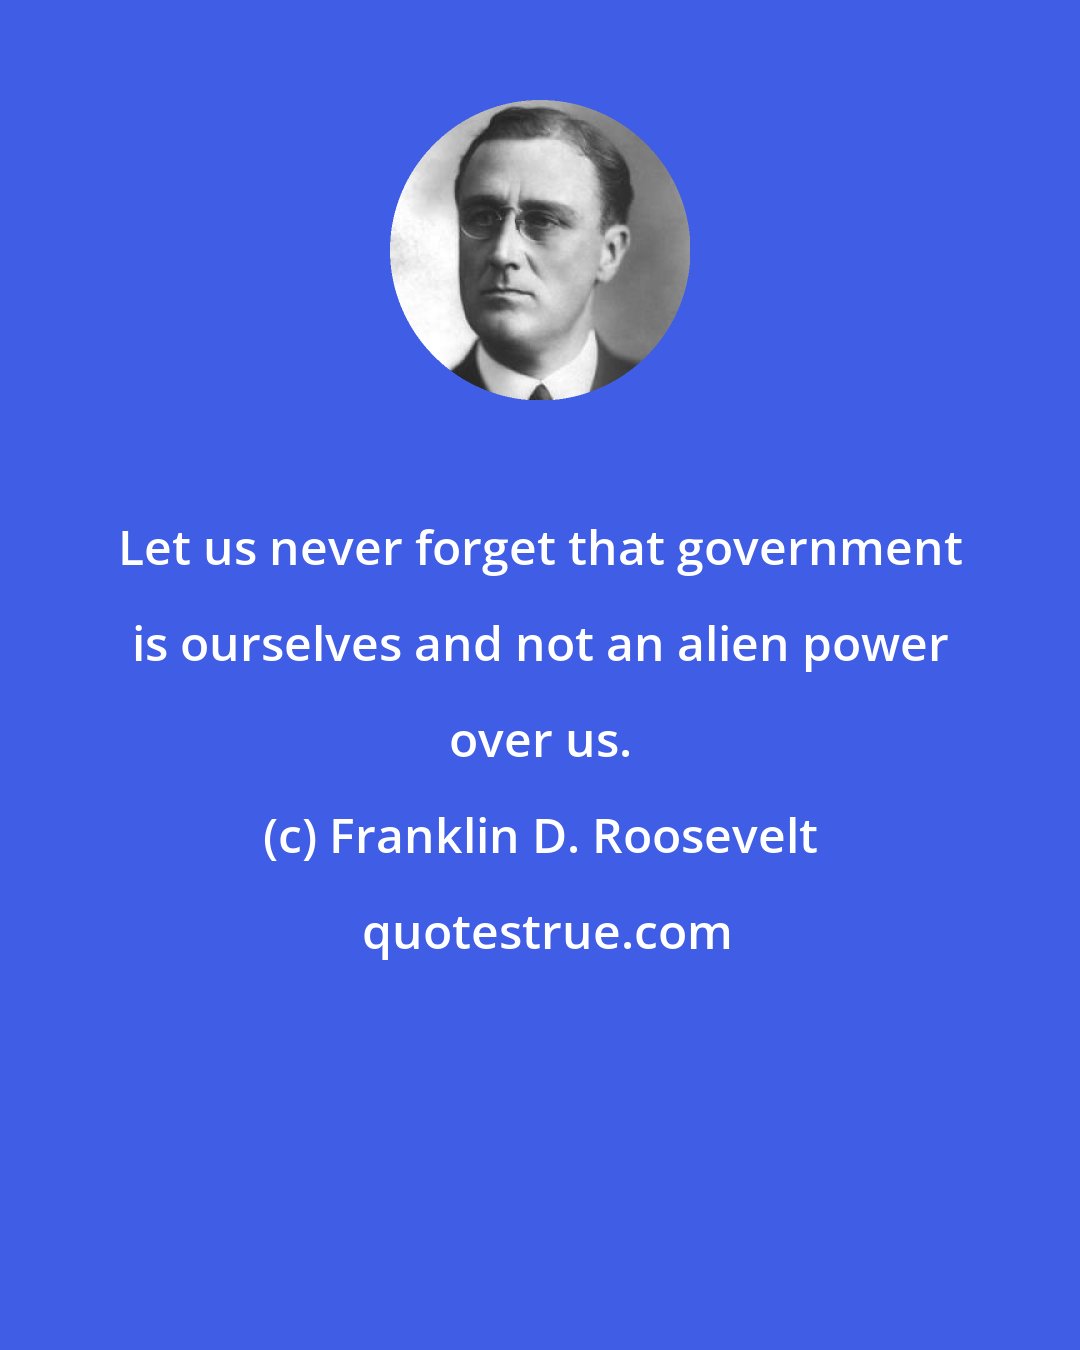 Franklin D. Roosevelt: Let us never forget that government is ourselves and not an alien power over us.